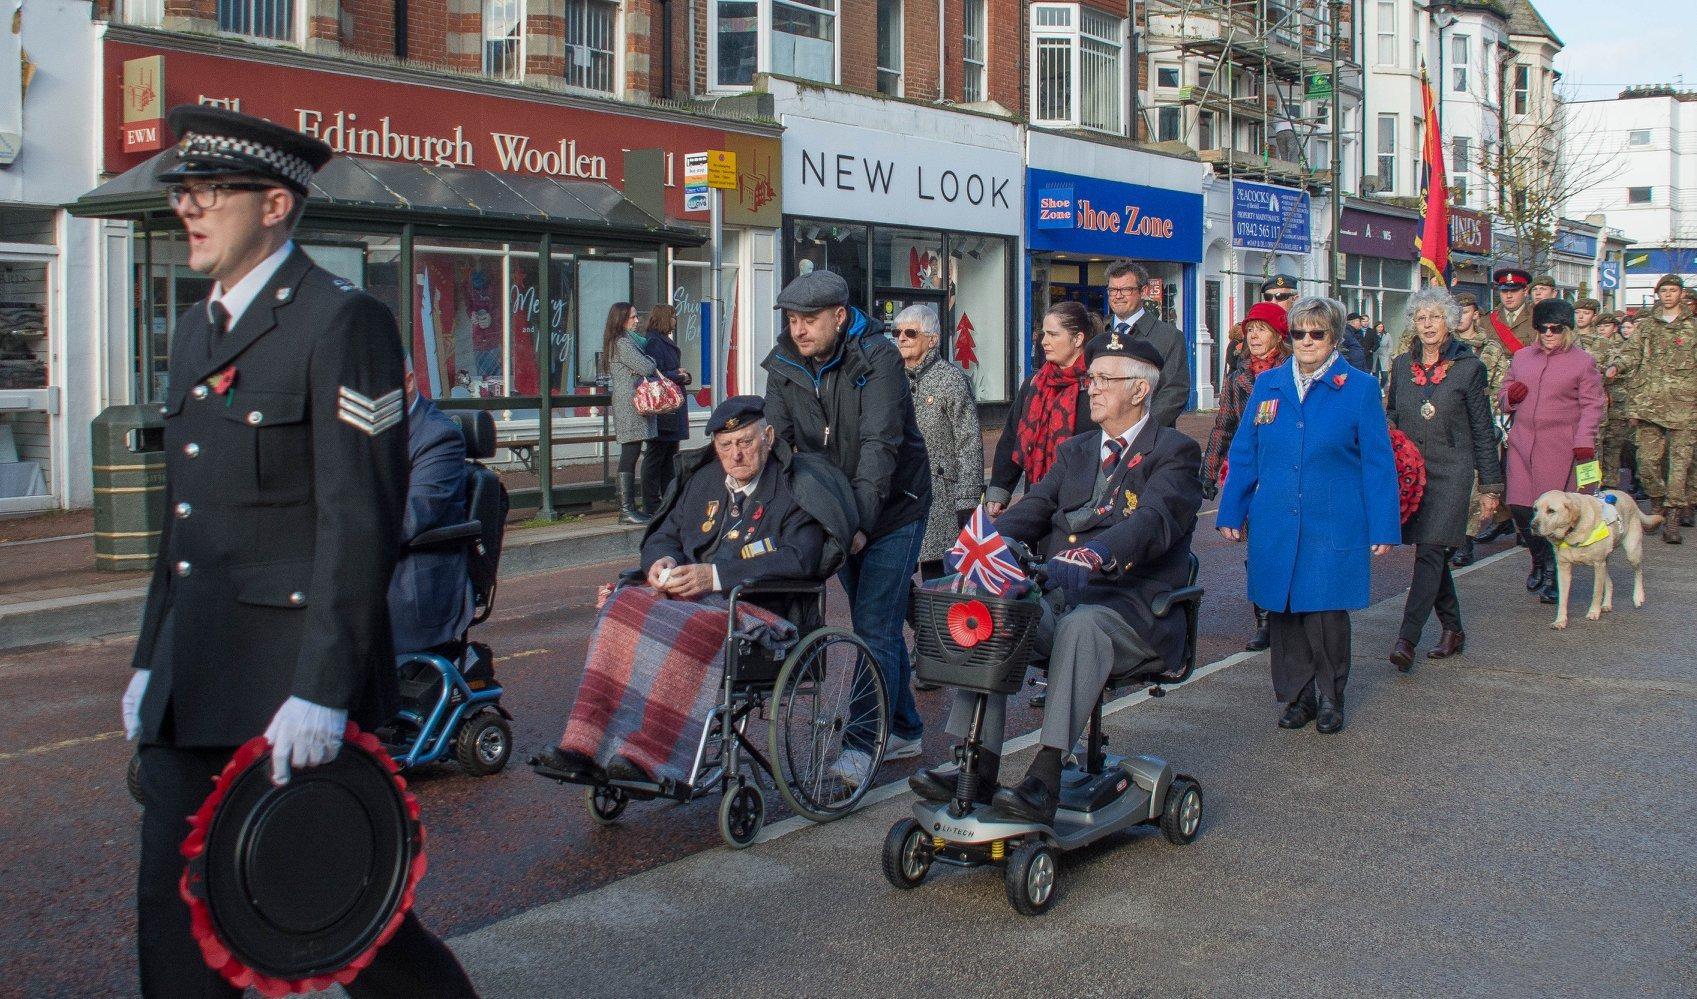 Bexhill Remembrance Service 2019. Photo by Jeff Penfold